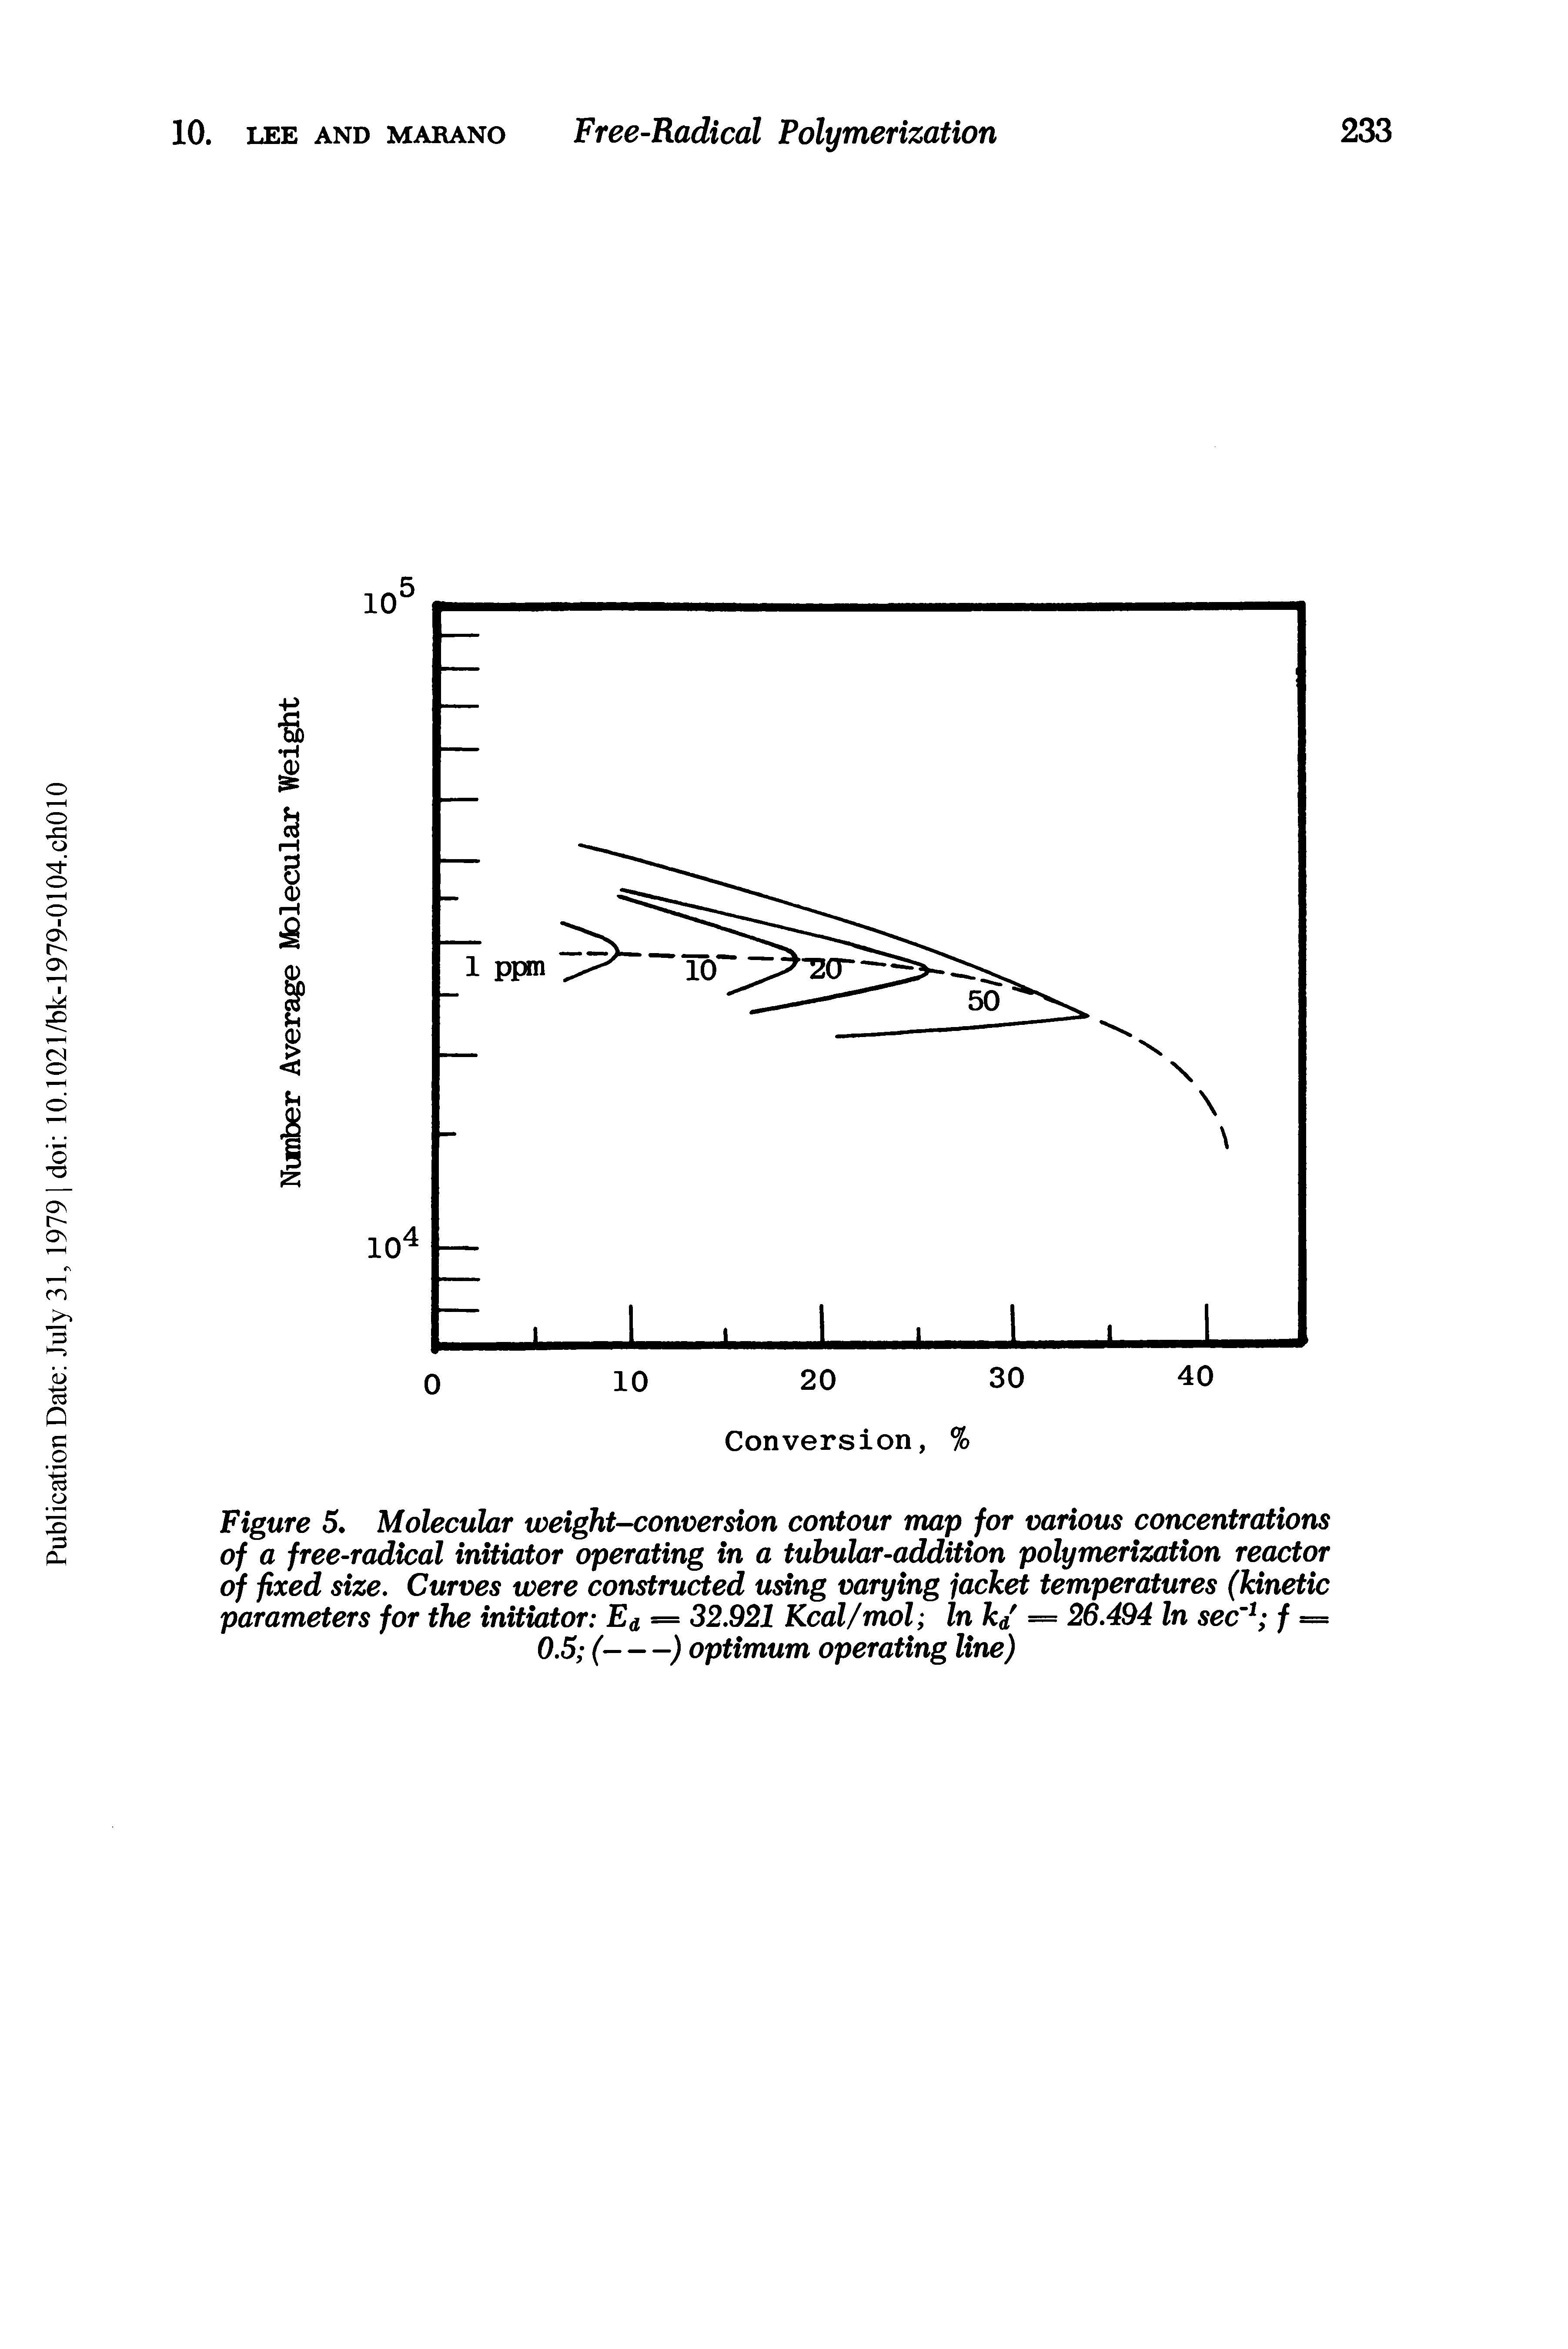 Figure 5. Molecular weight-conversion contour map for various concentrations of a free-radical initiator operating in a tubular-addition polymerization reactor of fixed size. Curves were constructed using varying jacket temperatures (kinetic parameters for the initiator Ea = 32.921 Kcal/mol In k/ = 26.494 In sec f = 0.5 (------------------------) optimum operating line)...